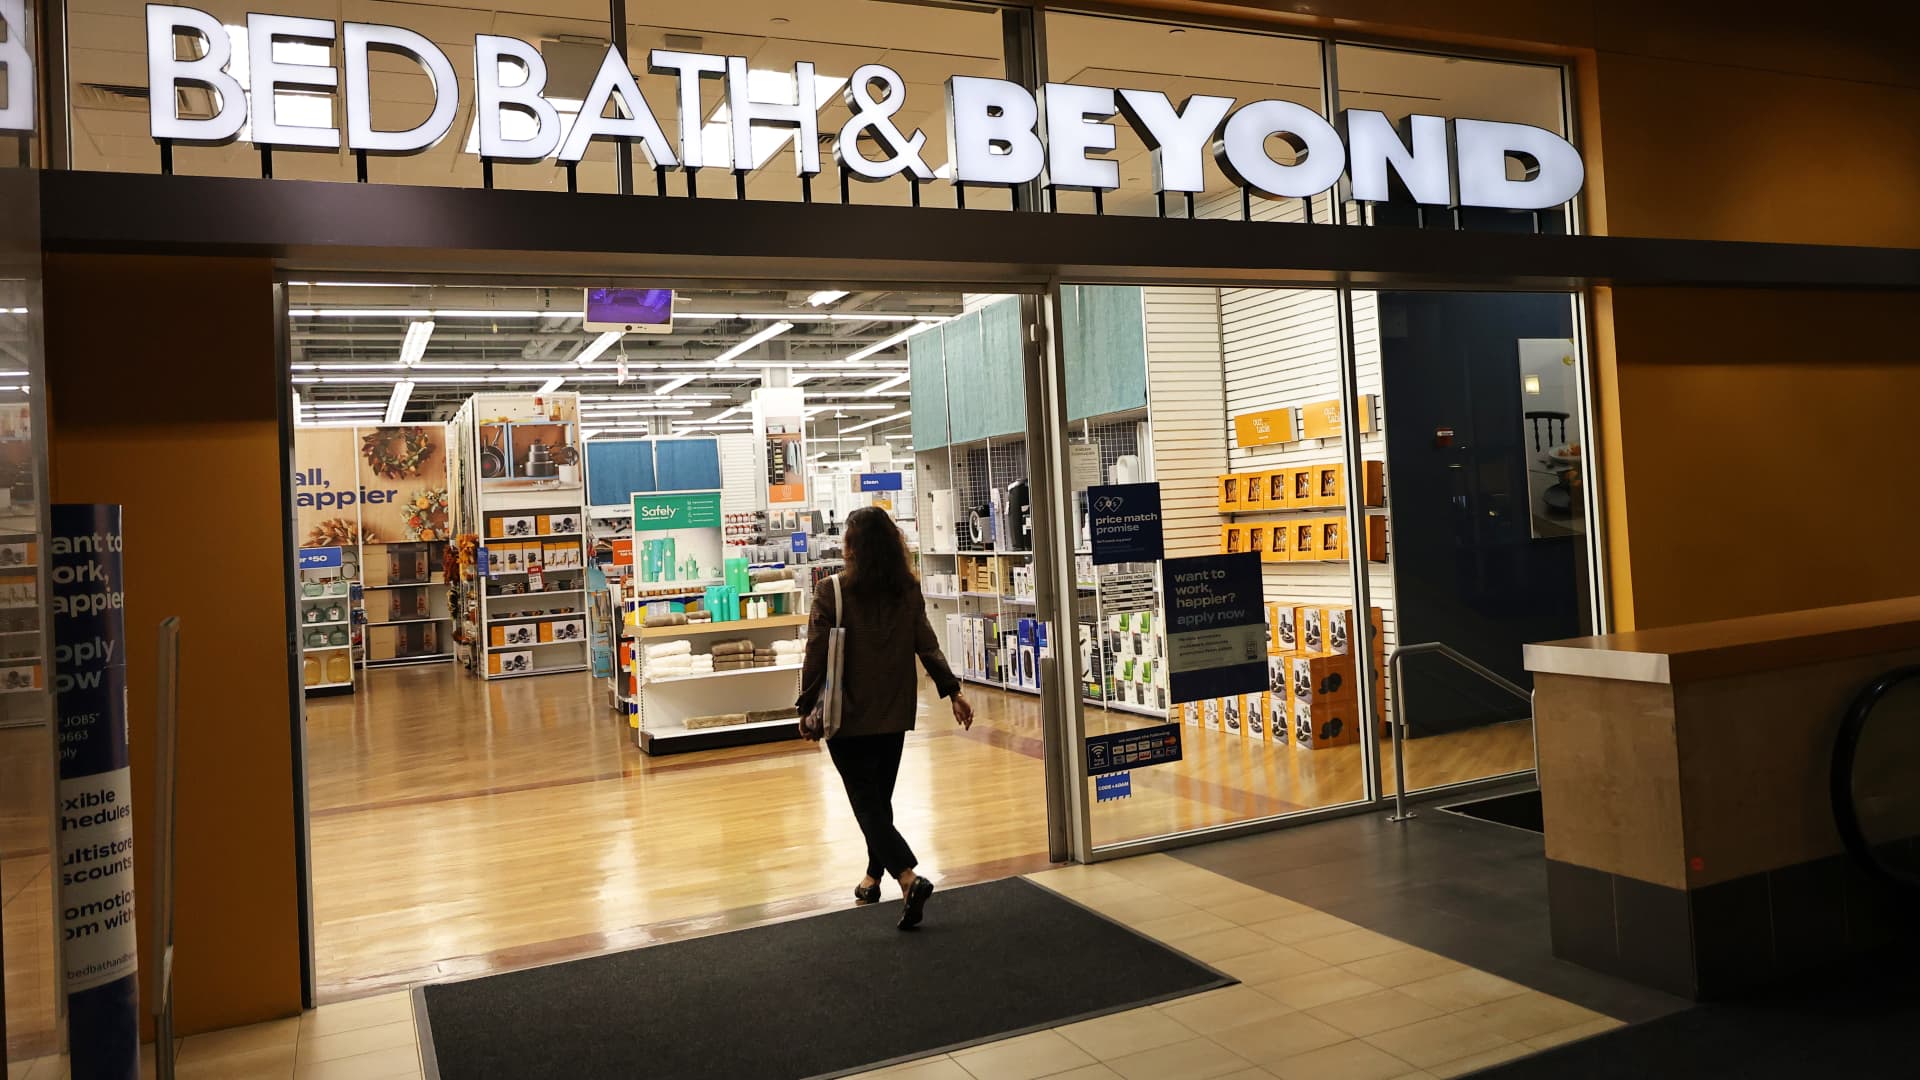 Bed Bath & Beyond (BBBY) Q2 2022 earnings